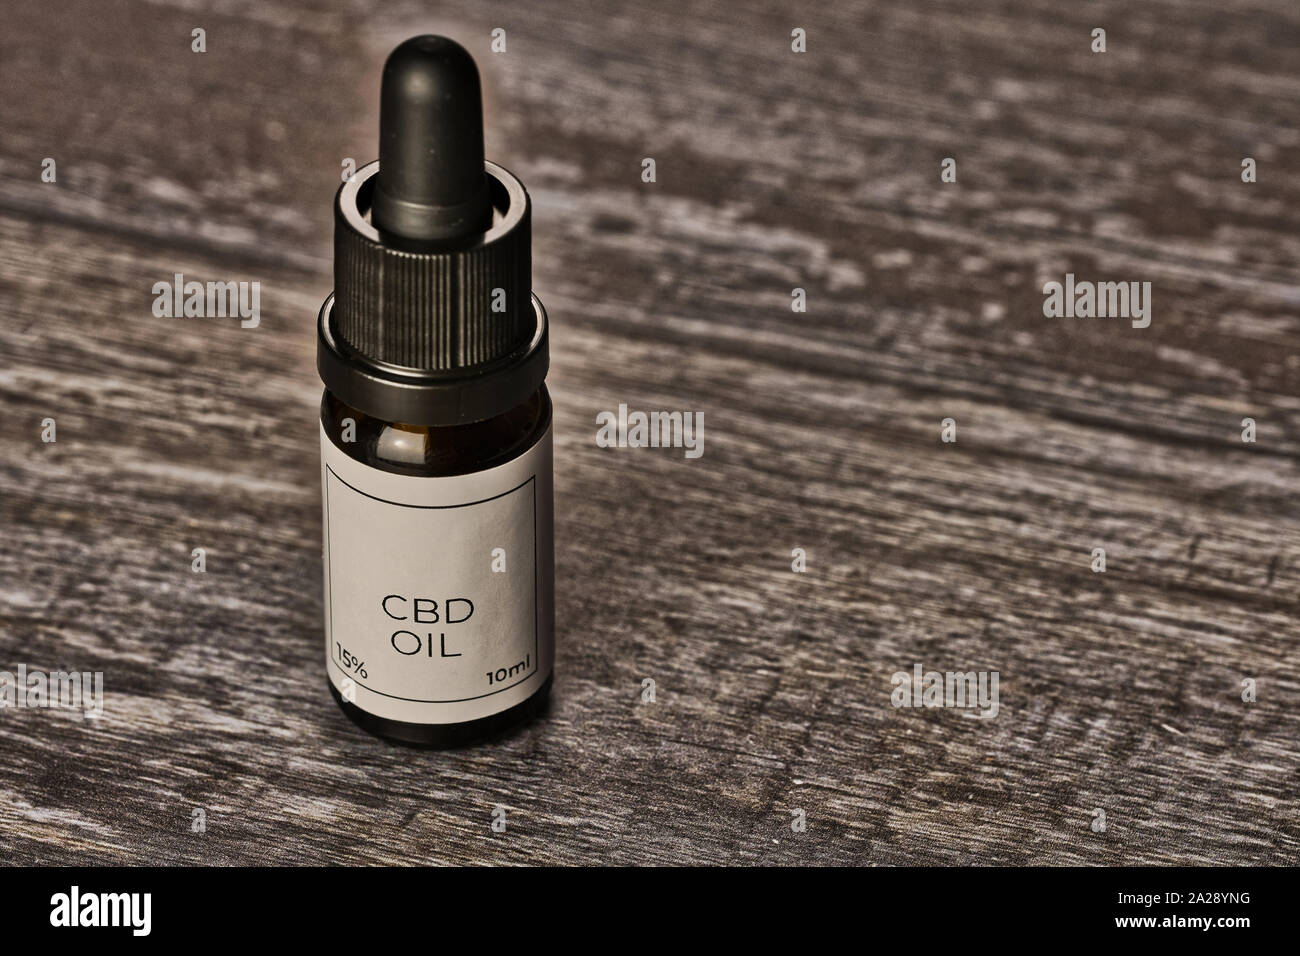 small bottle with CBD oil on wooden surface Stock Photo